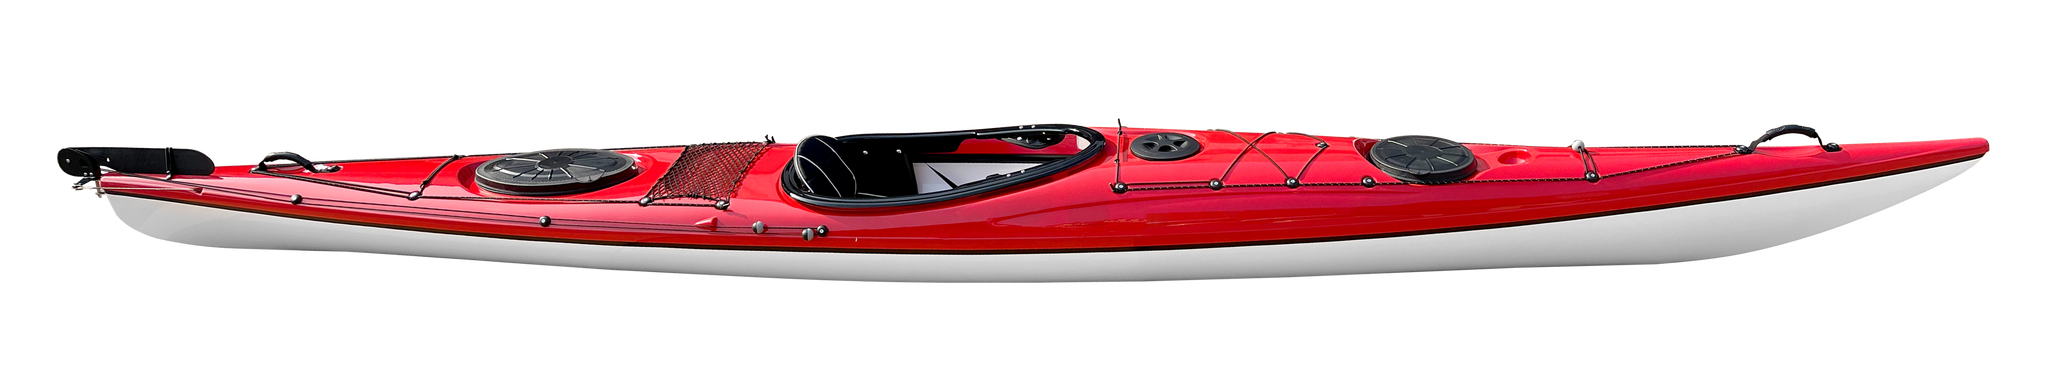 Quest Superlite ABS 520 Bay Sports 5.2m thermoformed kayak